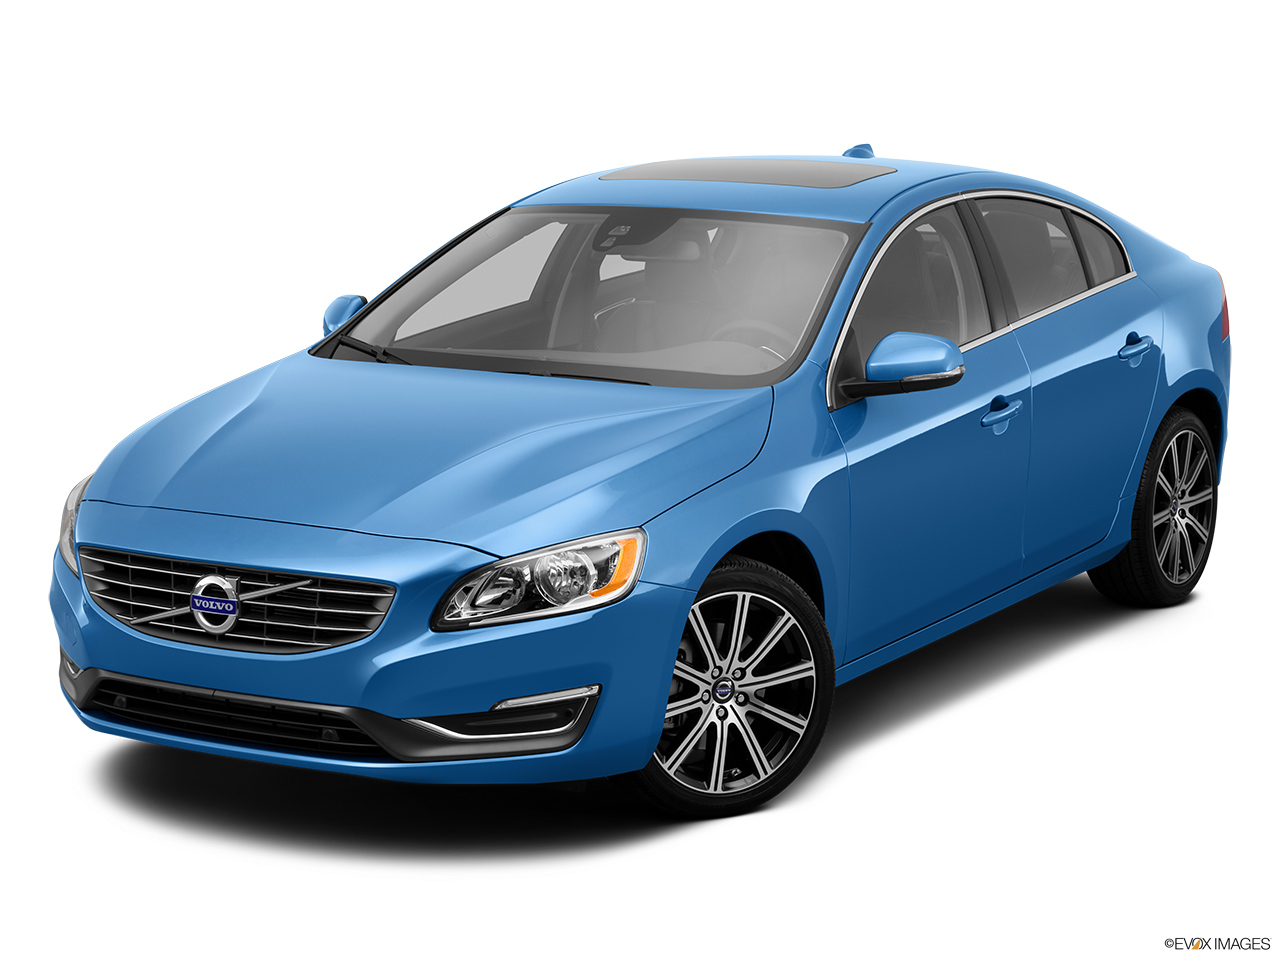 2014 Volvo S60 T5 FWD Premier Plus Front angle view. 